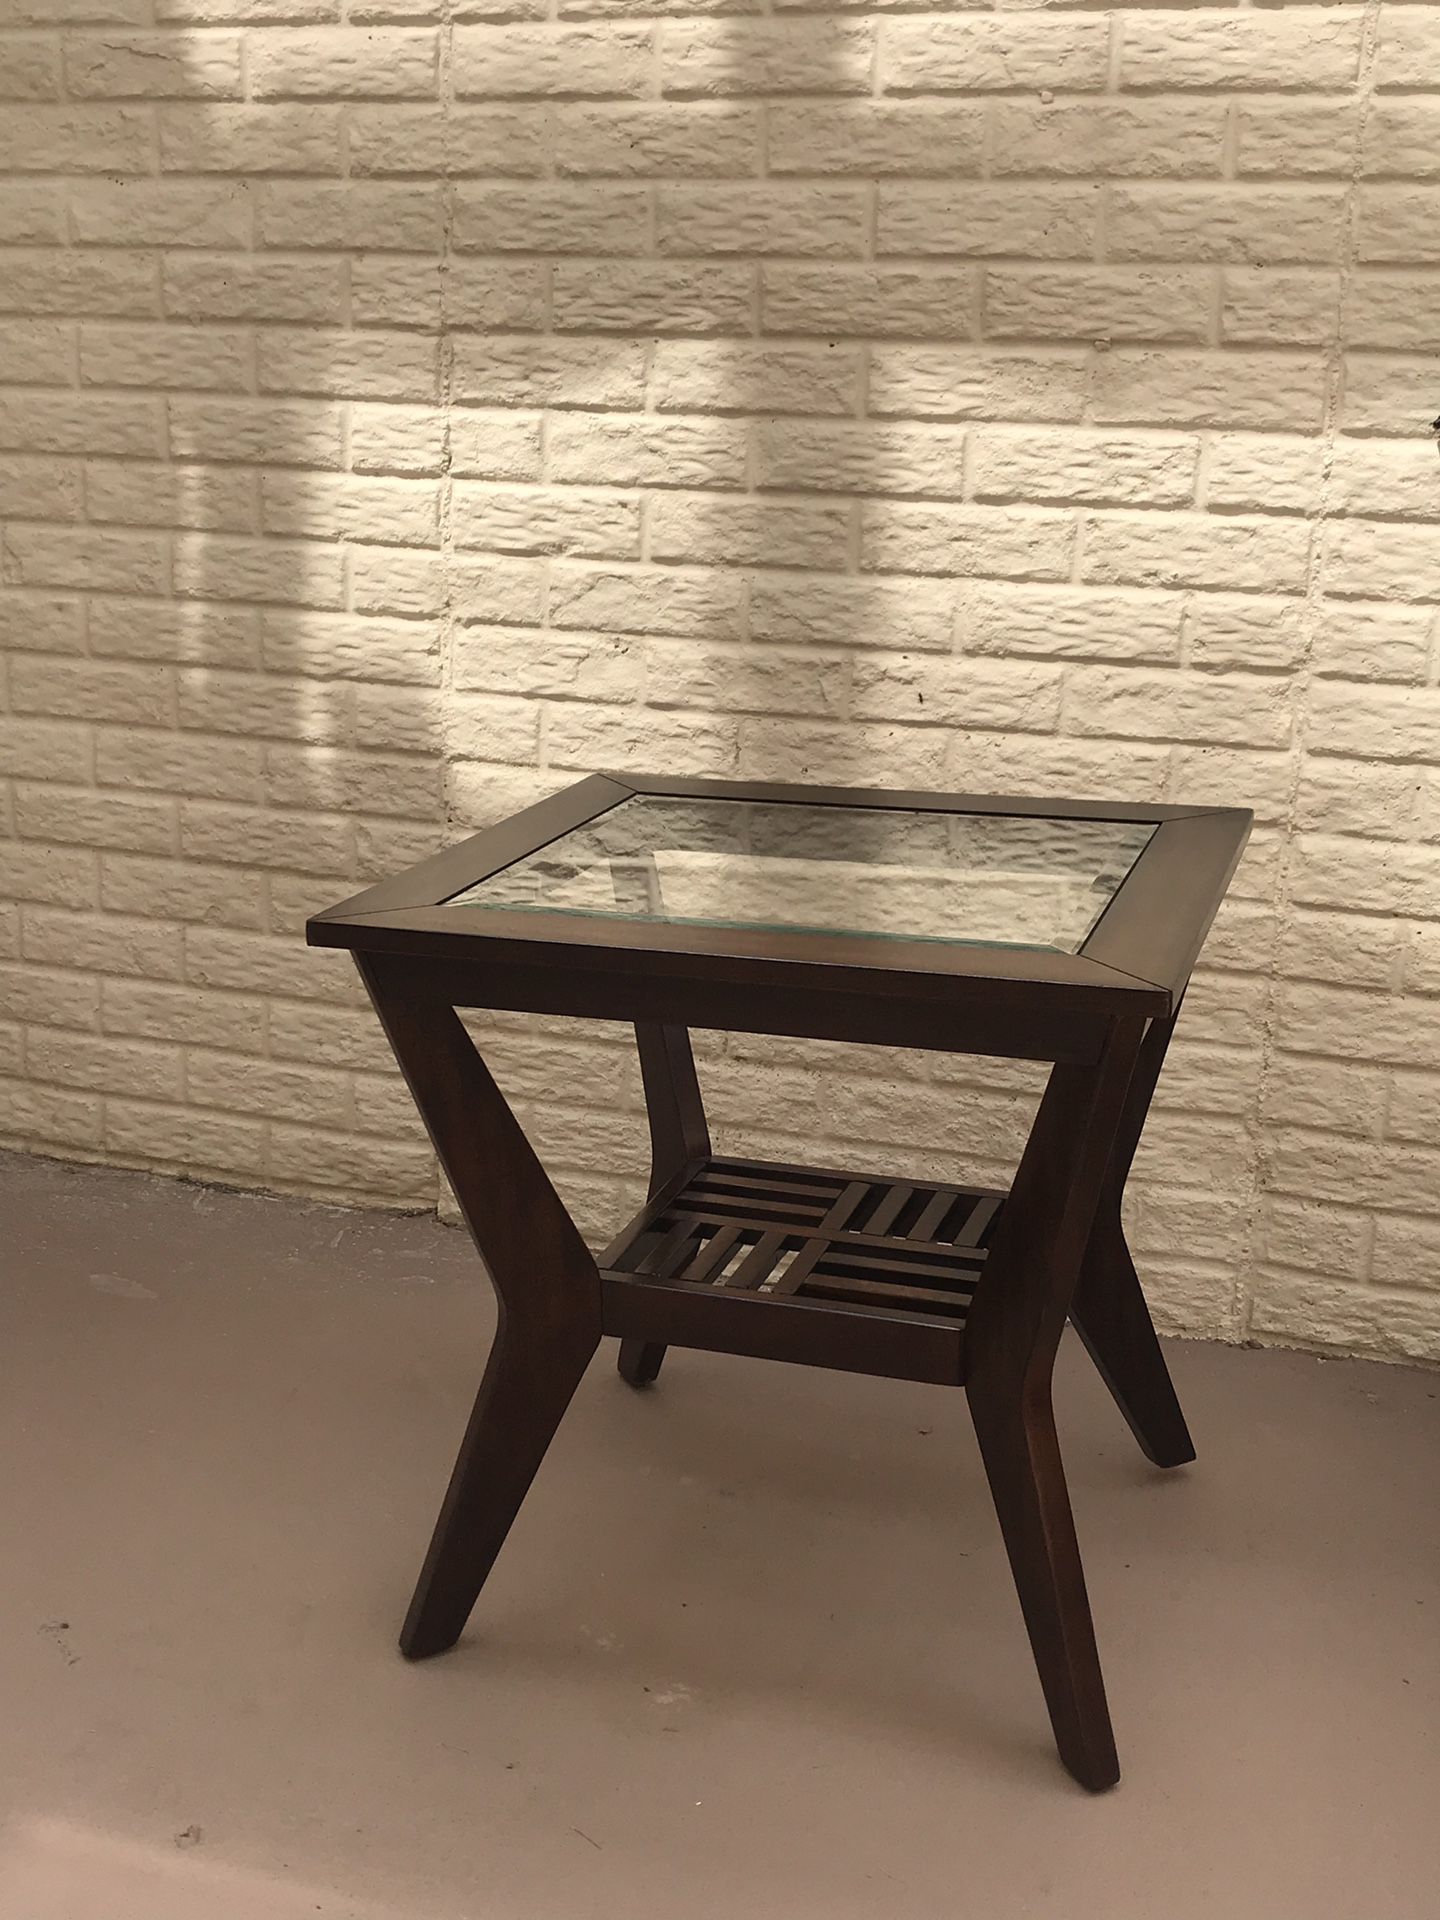 2 END TABLES- WOOD & GLASS ($80 for the pair)